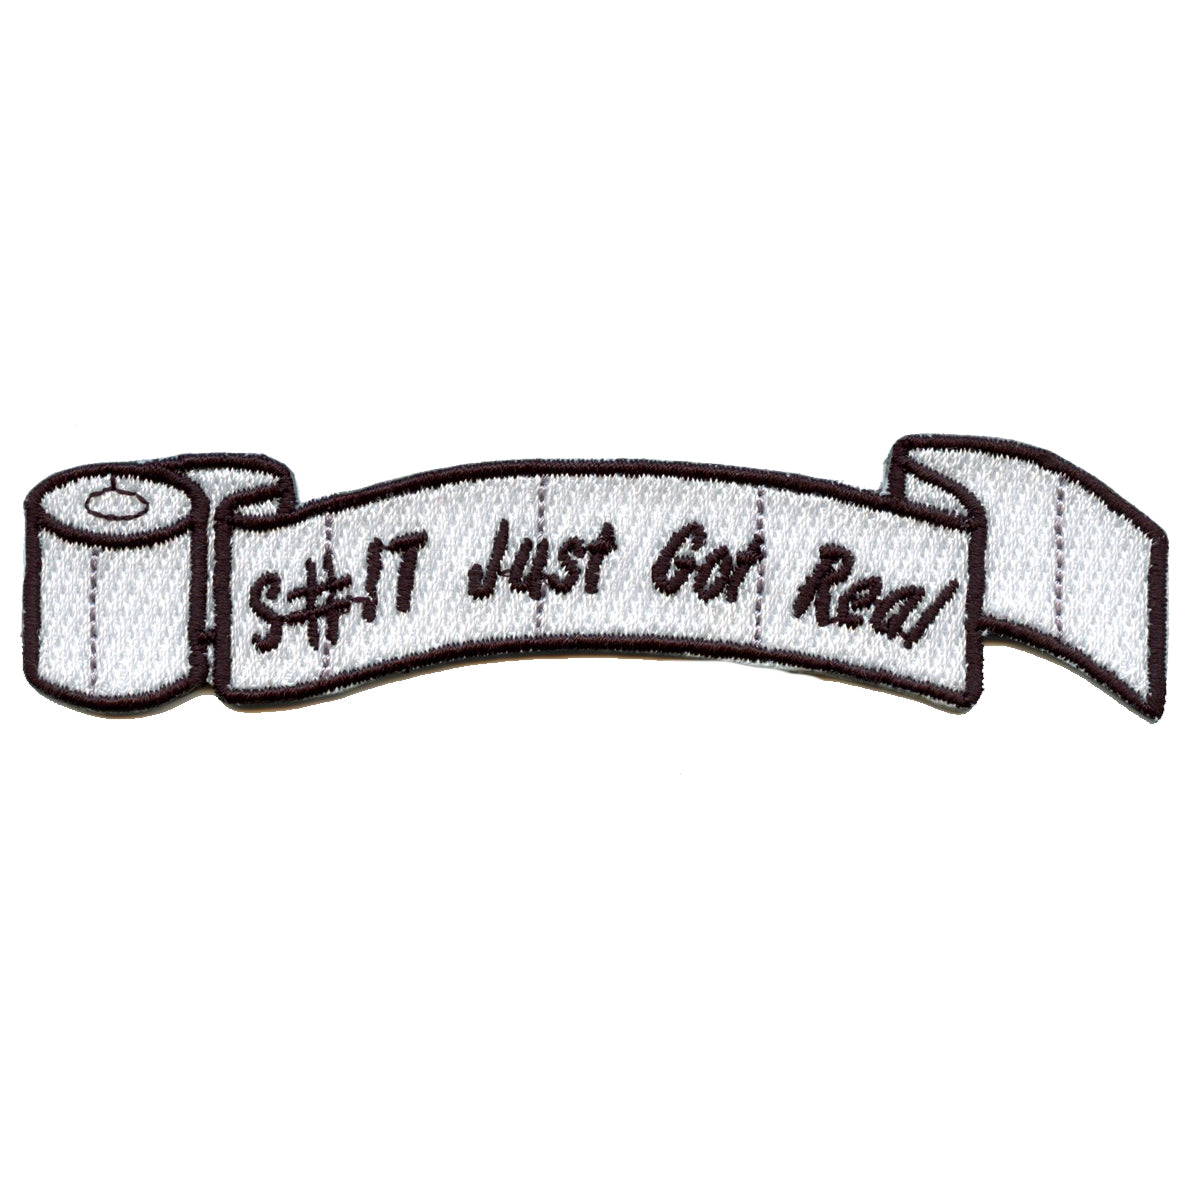 Toilet Paper Rolls S#it Just Got Real Embroidered Iron On Patch 